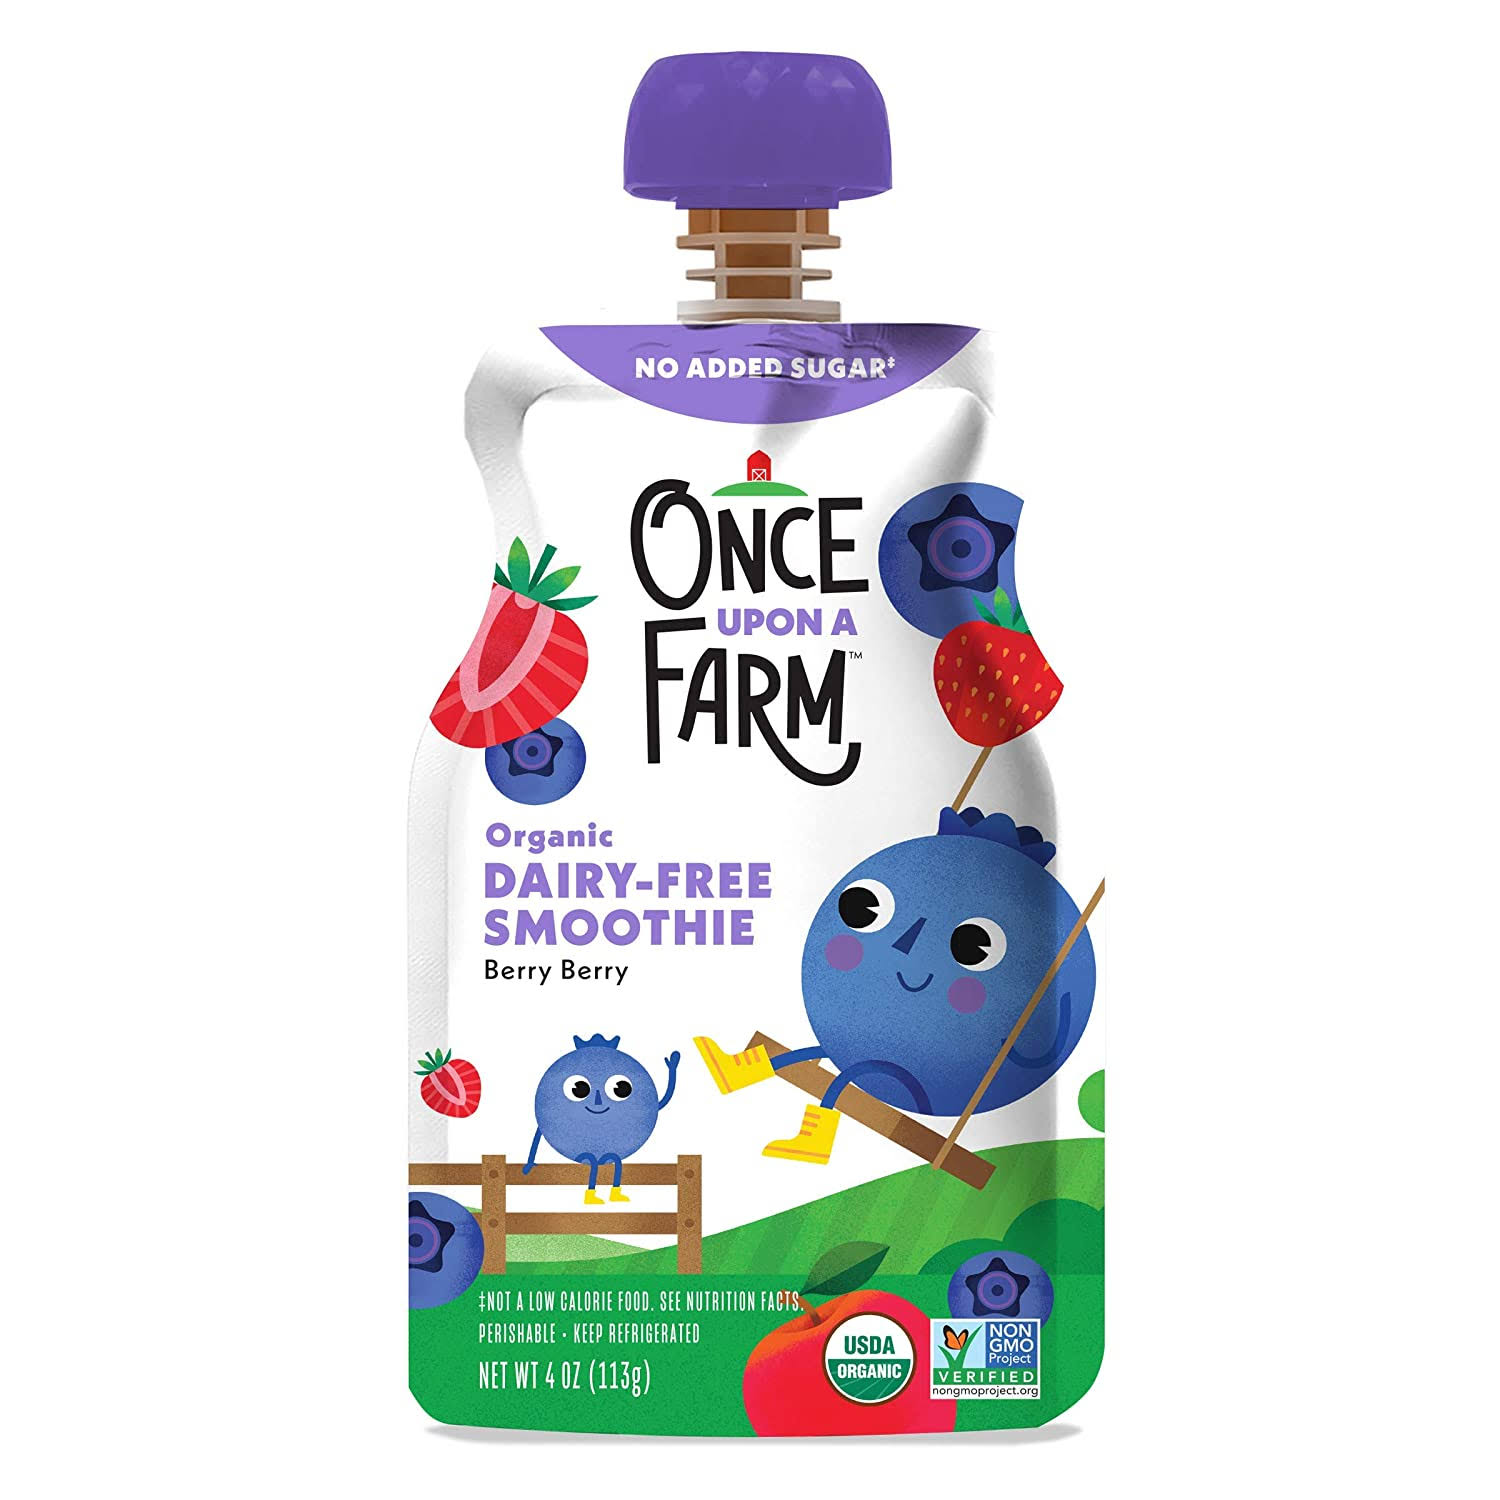 Once Upon A Farm Smoothie, Dairy-Free, Organic, Berry Berry - 4 oz